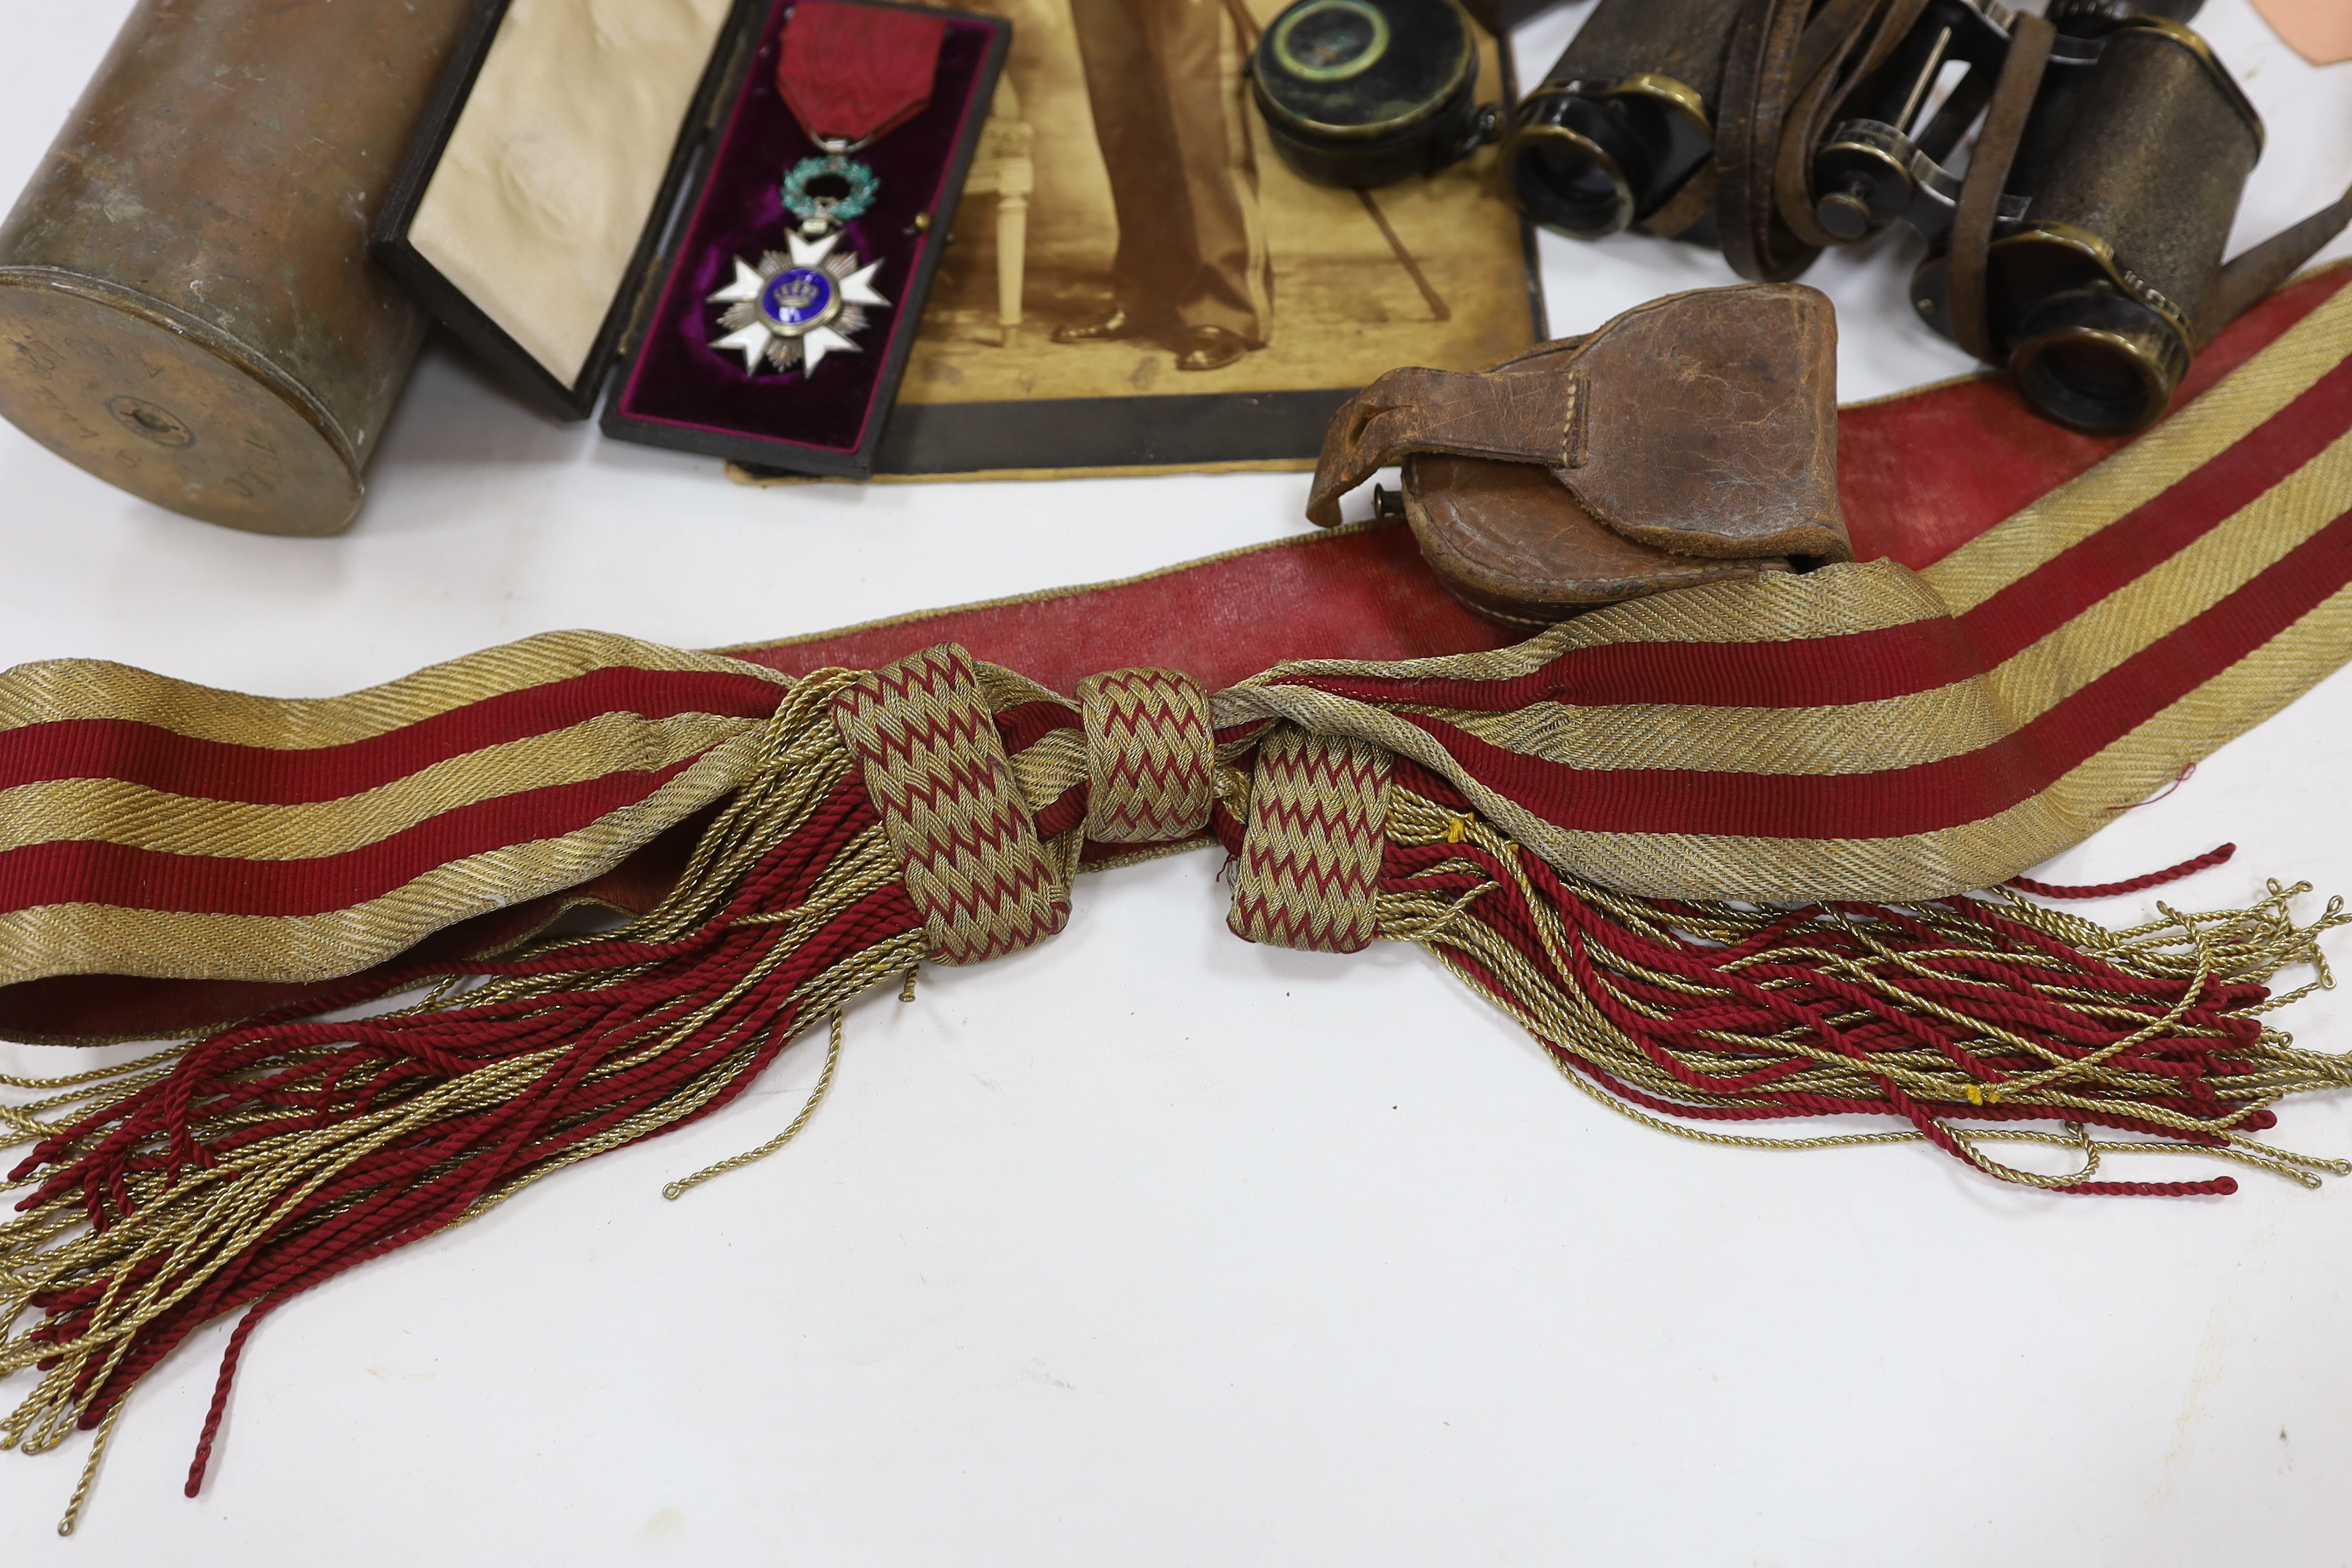 A late 19th century military sash with a related photograph showing the full uniform, a pair of Carl Zeiss binoculars, two compasses, a Belgium Order of the Crown cased medal, and a shell casing